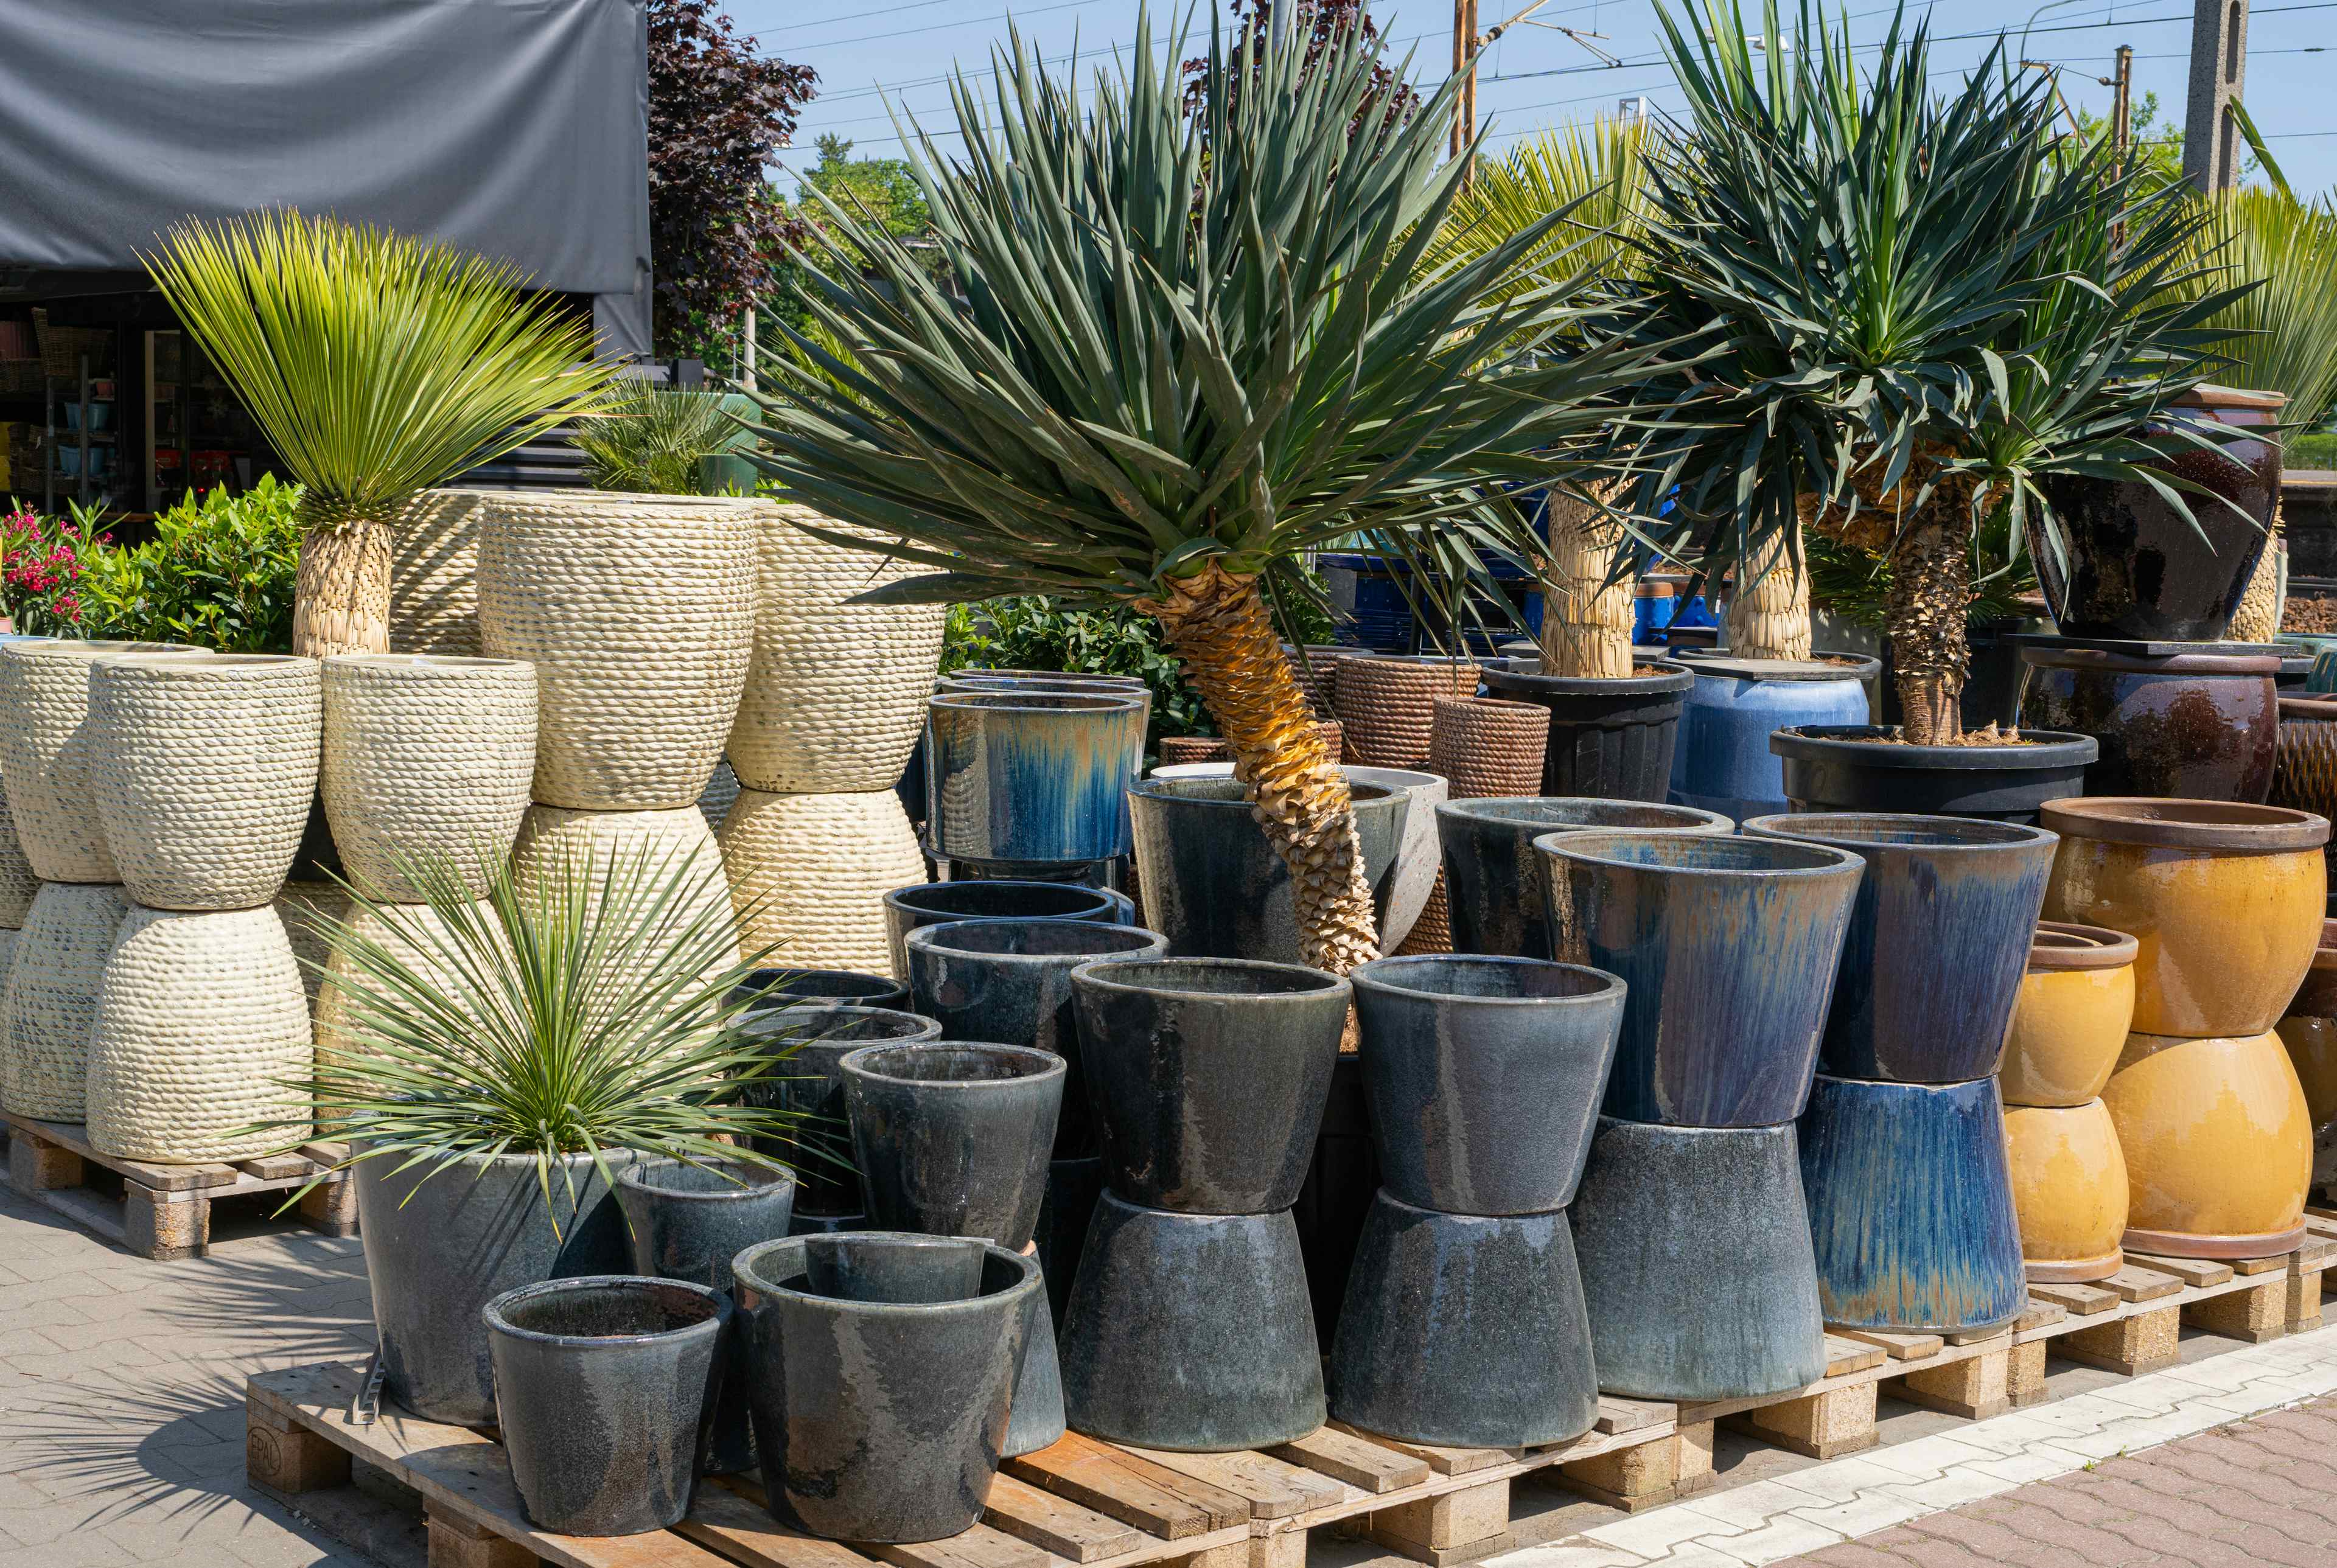 A series of glazed plant pottery.